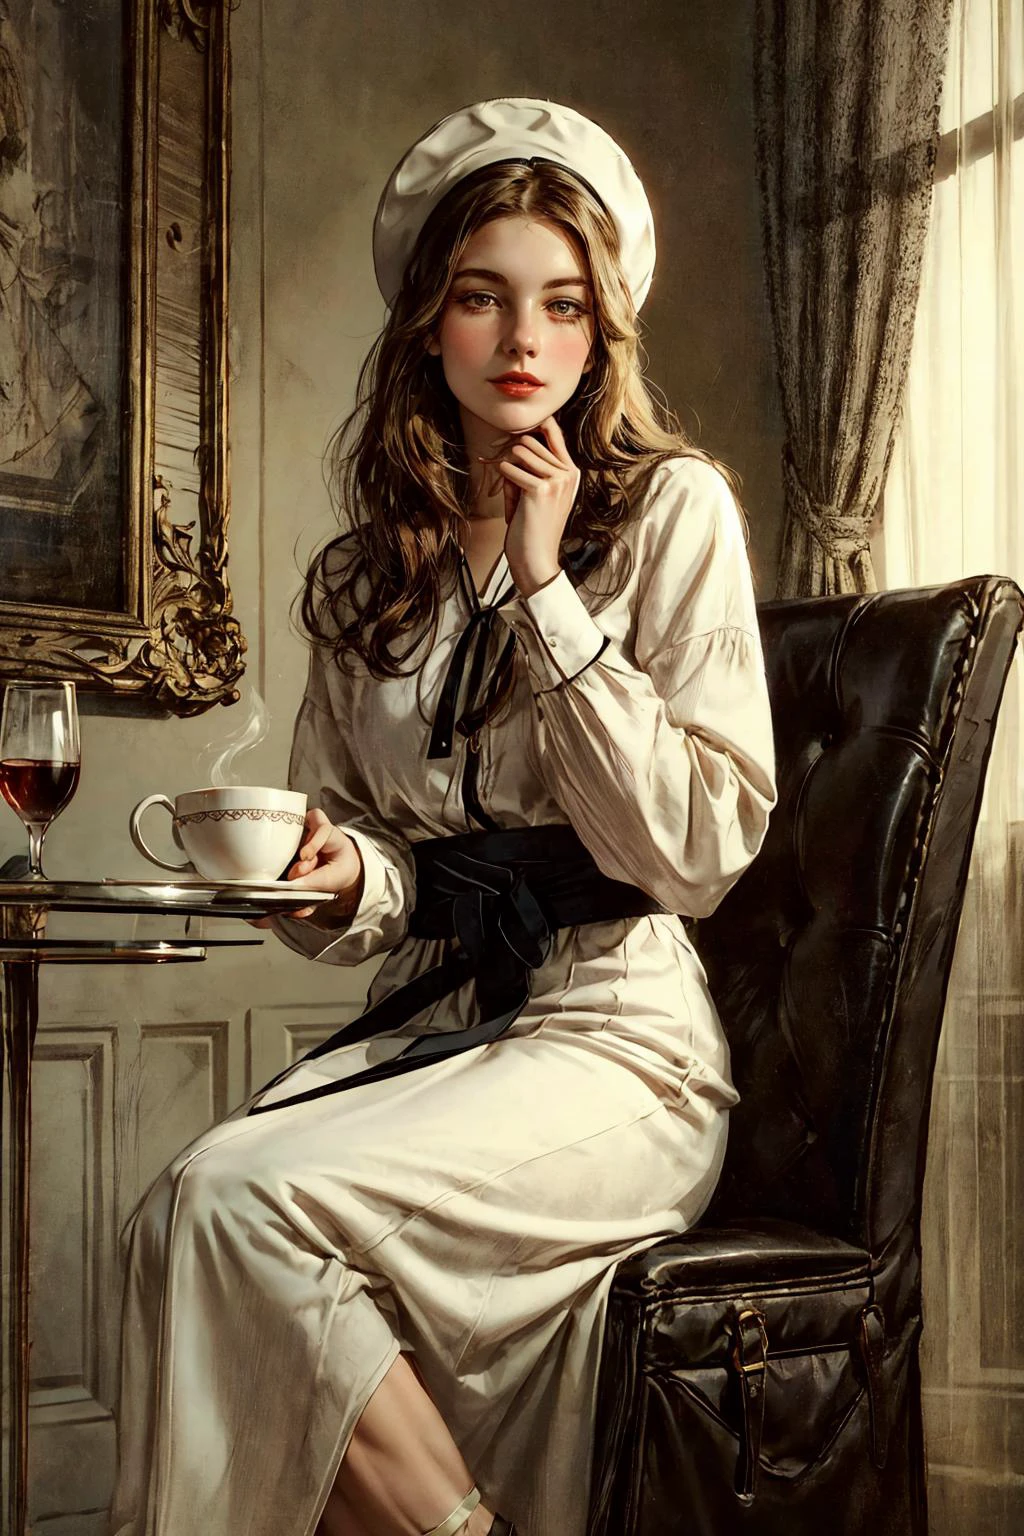 Generate an image that transports us to the enchanting world of the interwar period in Paris, where a young and elegant flight attendant savors a quiet moment at a charming Parisian cafÃ©.
The flight attendant herself embodies the grace and sophistication of the era. She possesses a timeless beauty and slender figure that complements her chic and vintage attire, perfectly in sync with the ambiance of the interwar period.
Her hair, a rich chestnut hue, is elegantly styled in loose waves that frame her face. Her eyes, a captivating shade of deep hazel, reflect both the allure of Paris and a sense of curiosity. Long, dark eyelashes emphasize her eyes, and she wears subtle brown eyeshadow that adds to her sophistication.
Her facial features are delicately proportioned, featuring a  nose and high cheekbones that evoke the elegance of the interwar era. Her lips, with a natural rosy tint, form a warm and inviting smile that exudes charm and grace.
The flight attendant's attire is a testament to the fashion of the timeâa tailored, knee-length dress cinched at the waist and flared at the skirt. She wears a stylish cloche hat adorned with a ribbon, adding an air of sophistication. Classic pumps and a vintage leather handbag complete her ensemble.
As she sits at the Parisian cafÃ©, she enjoys a cup of coffee, her delicate fingers wrapped around the warm porcelain cup. The cafÃ© exudes an authentic interwar atmosphere, with wrought-iron tables and chairs, checkered tablecloths, and the soft hum of conversation in the background.
The image is bathed in the soft, romantic light of a Parisian afternoon, casting a warm and nostalgic glow over the scene. It captures a fleeting moment in time, where the flight attendant relishes the magic of Paris during the interwar period, embodying the spirit of elegance and exploration.
This revised prompt focuses on the flight attendant's experience at a Parisian cafÃ©, maintaining the interwar atmosphere.  